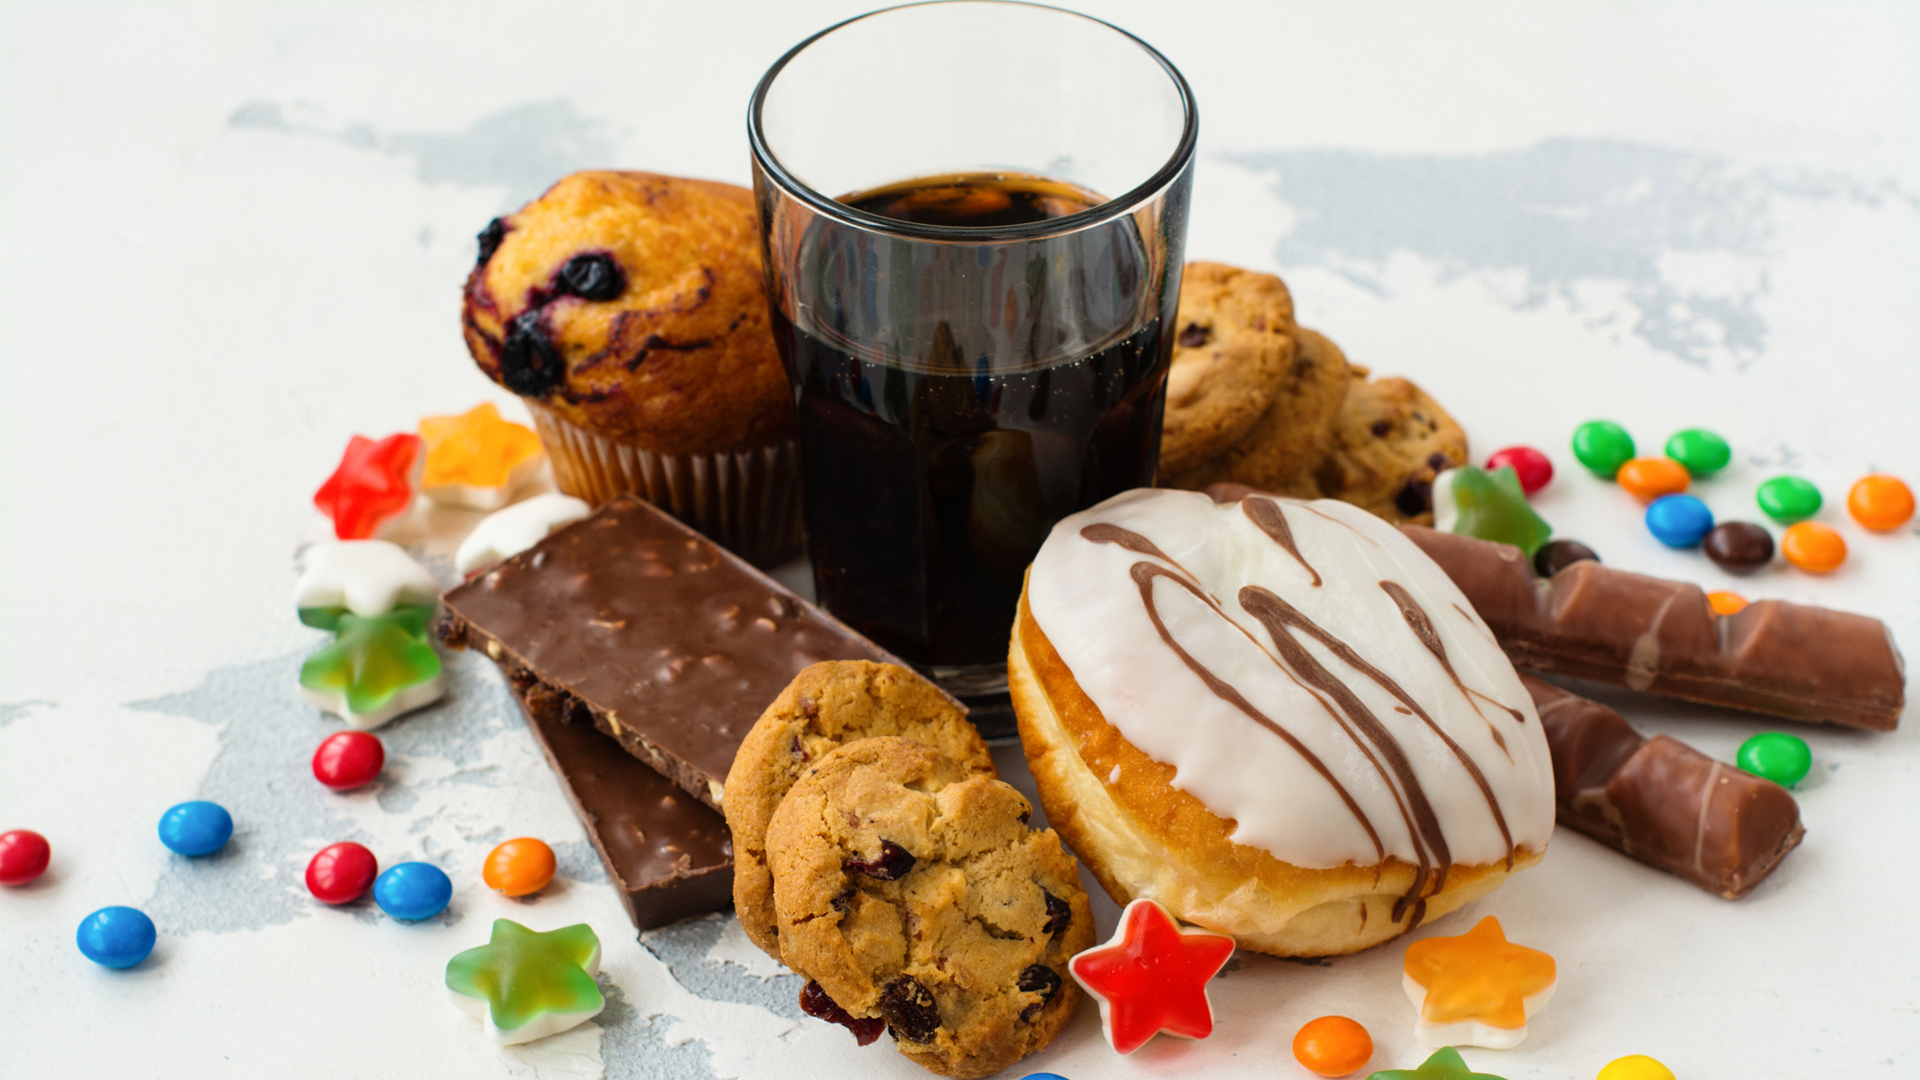 The image features processed foods and simple carbohydrates, including donuts, soda, cookies, and chocolate